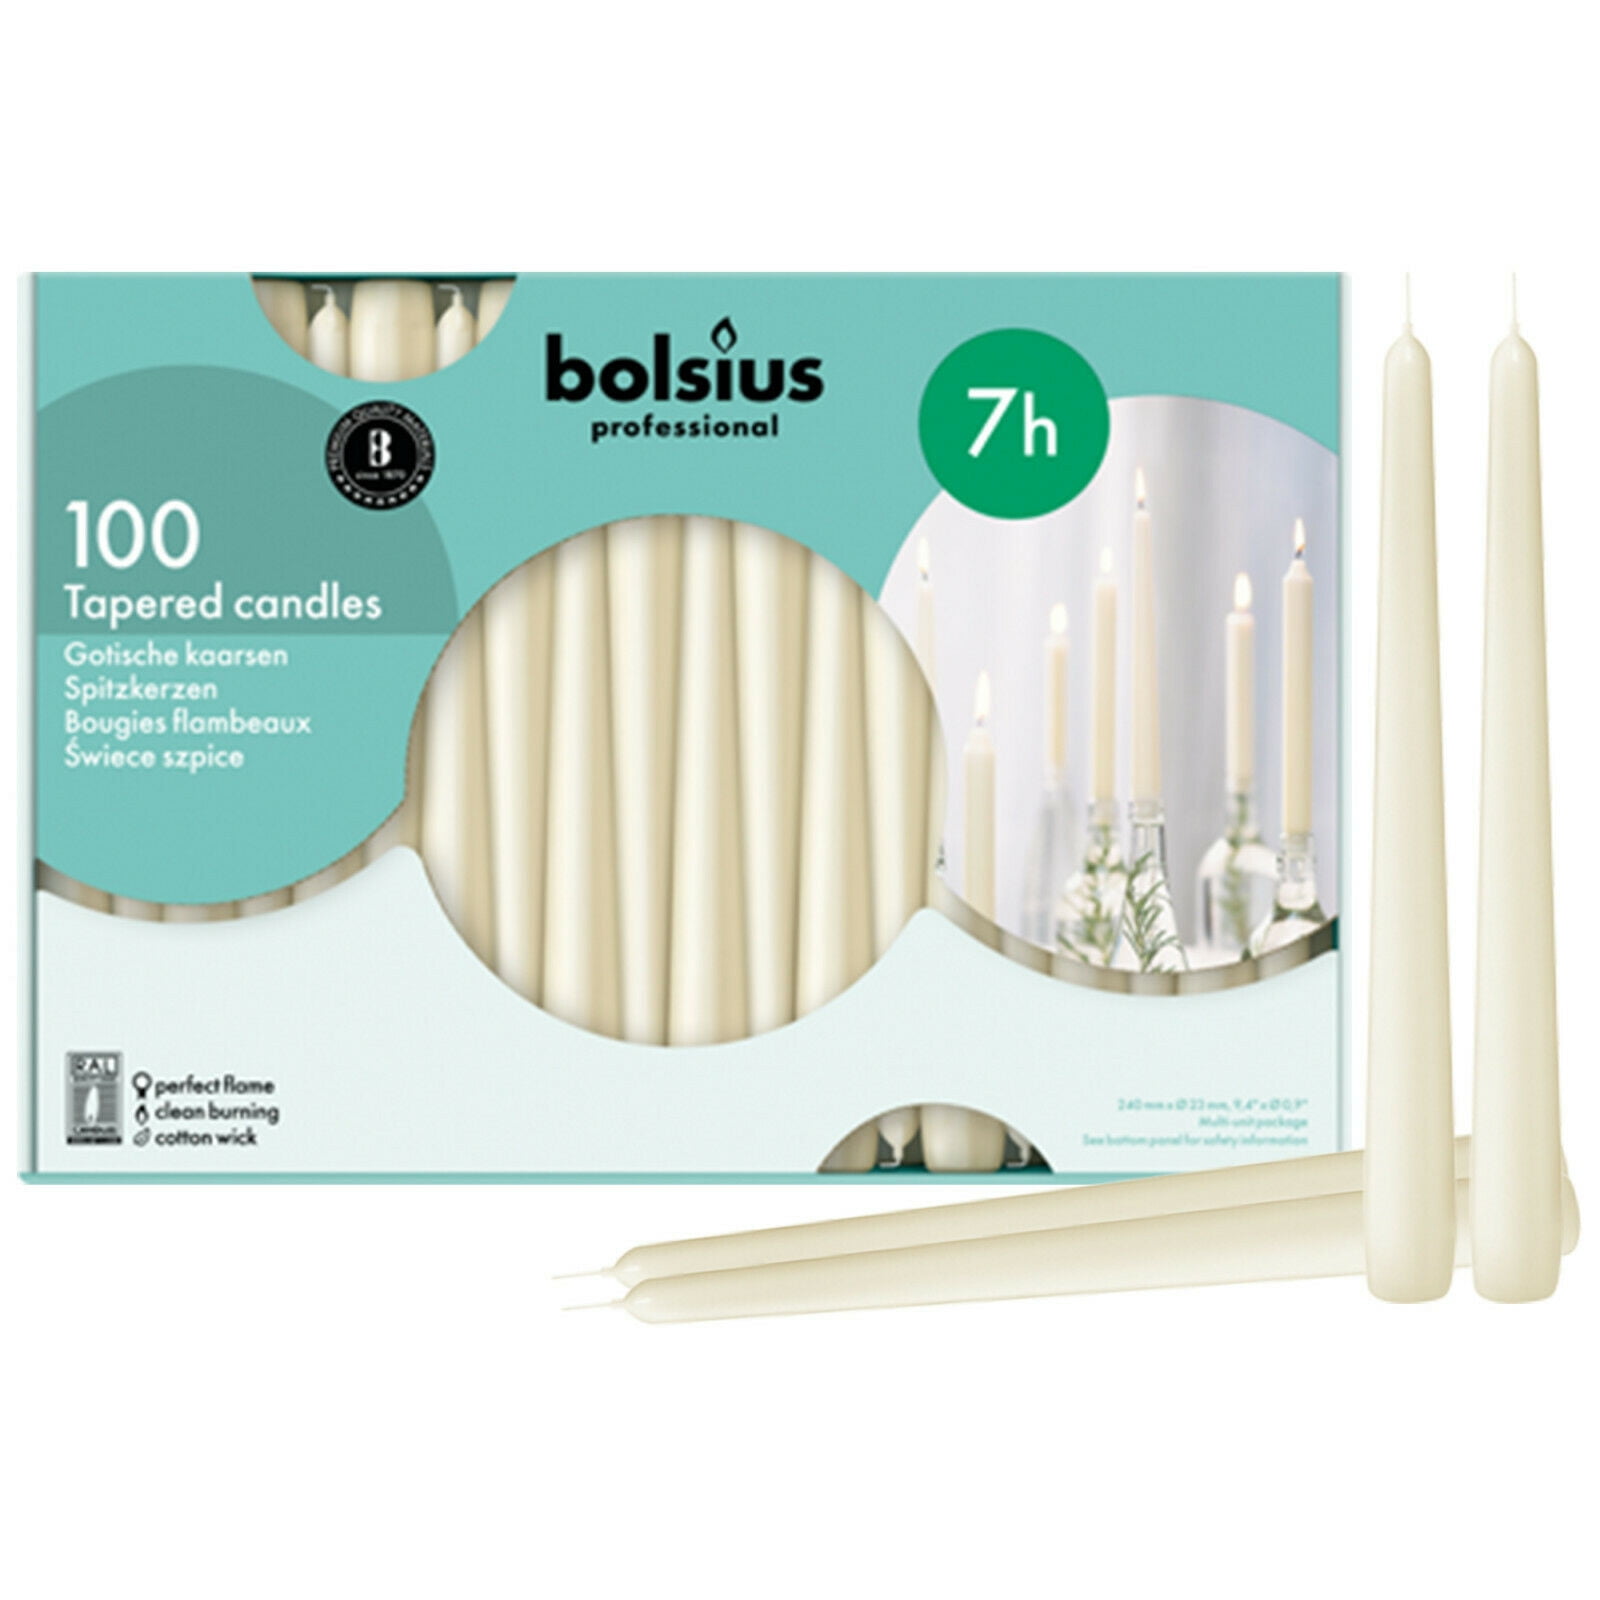 Bolsius Tapered 10in Tabletop Candles in Ivory Made of Wax Pack of 100 